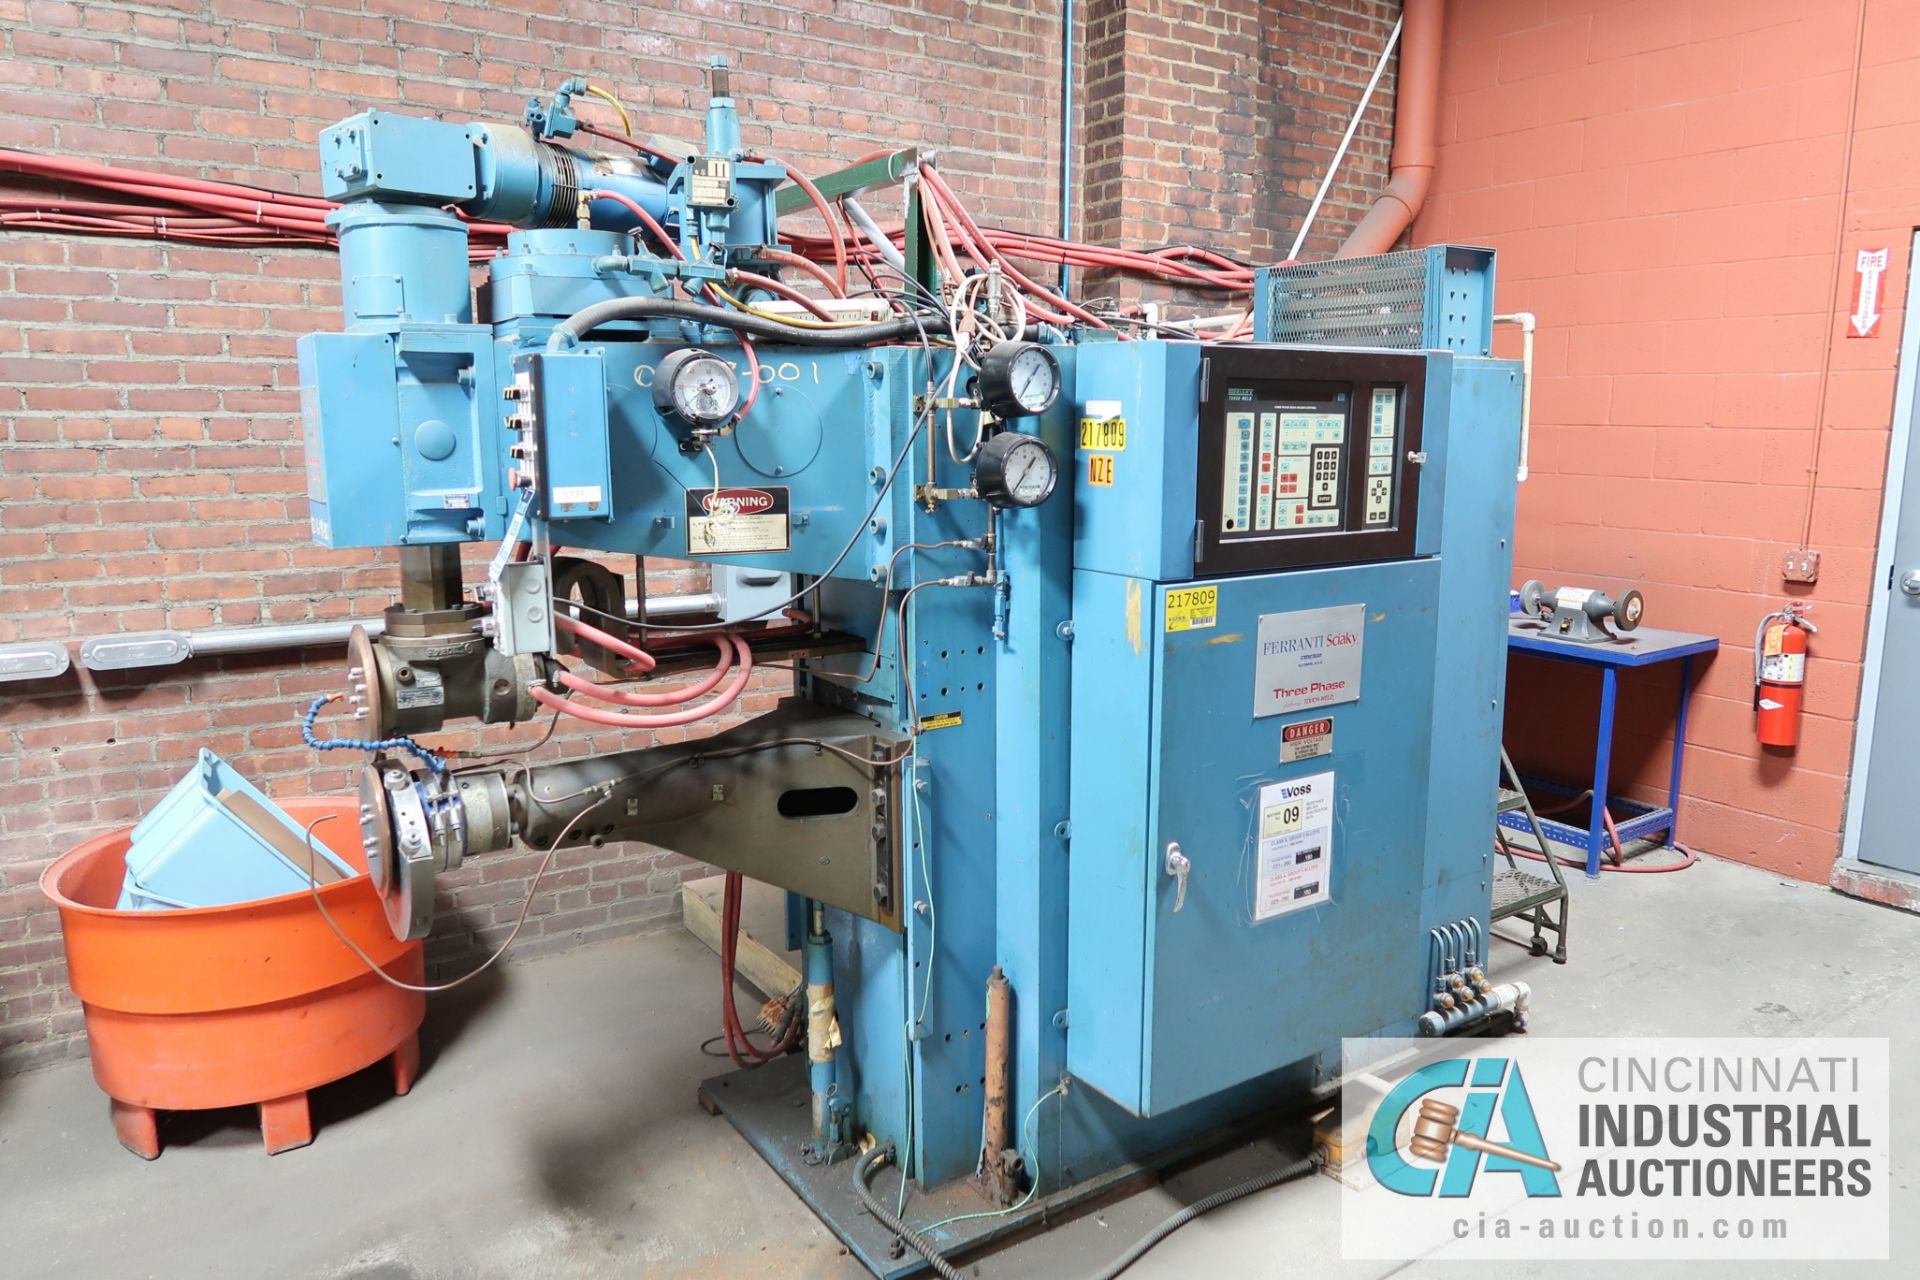 75 KVA FERRANTI-SCIAKY TYPE PMMITCMP SEAM WELDER; S/N 11487, 460 VOLTS, 60 HERTZ, SCIAKY TOUCH- - Image 2 of 12